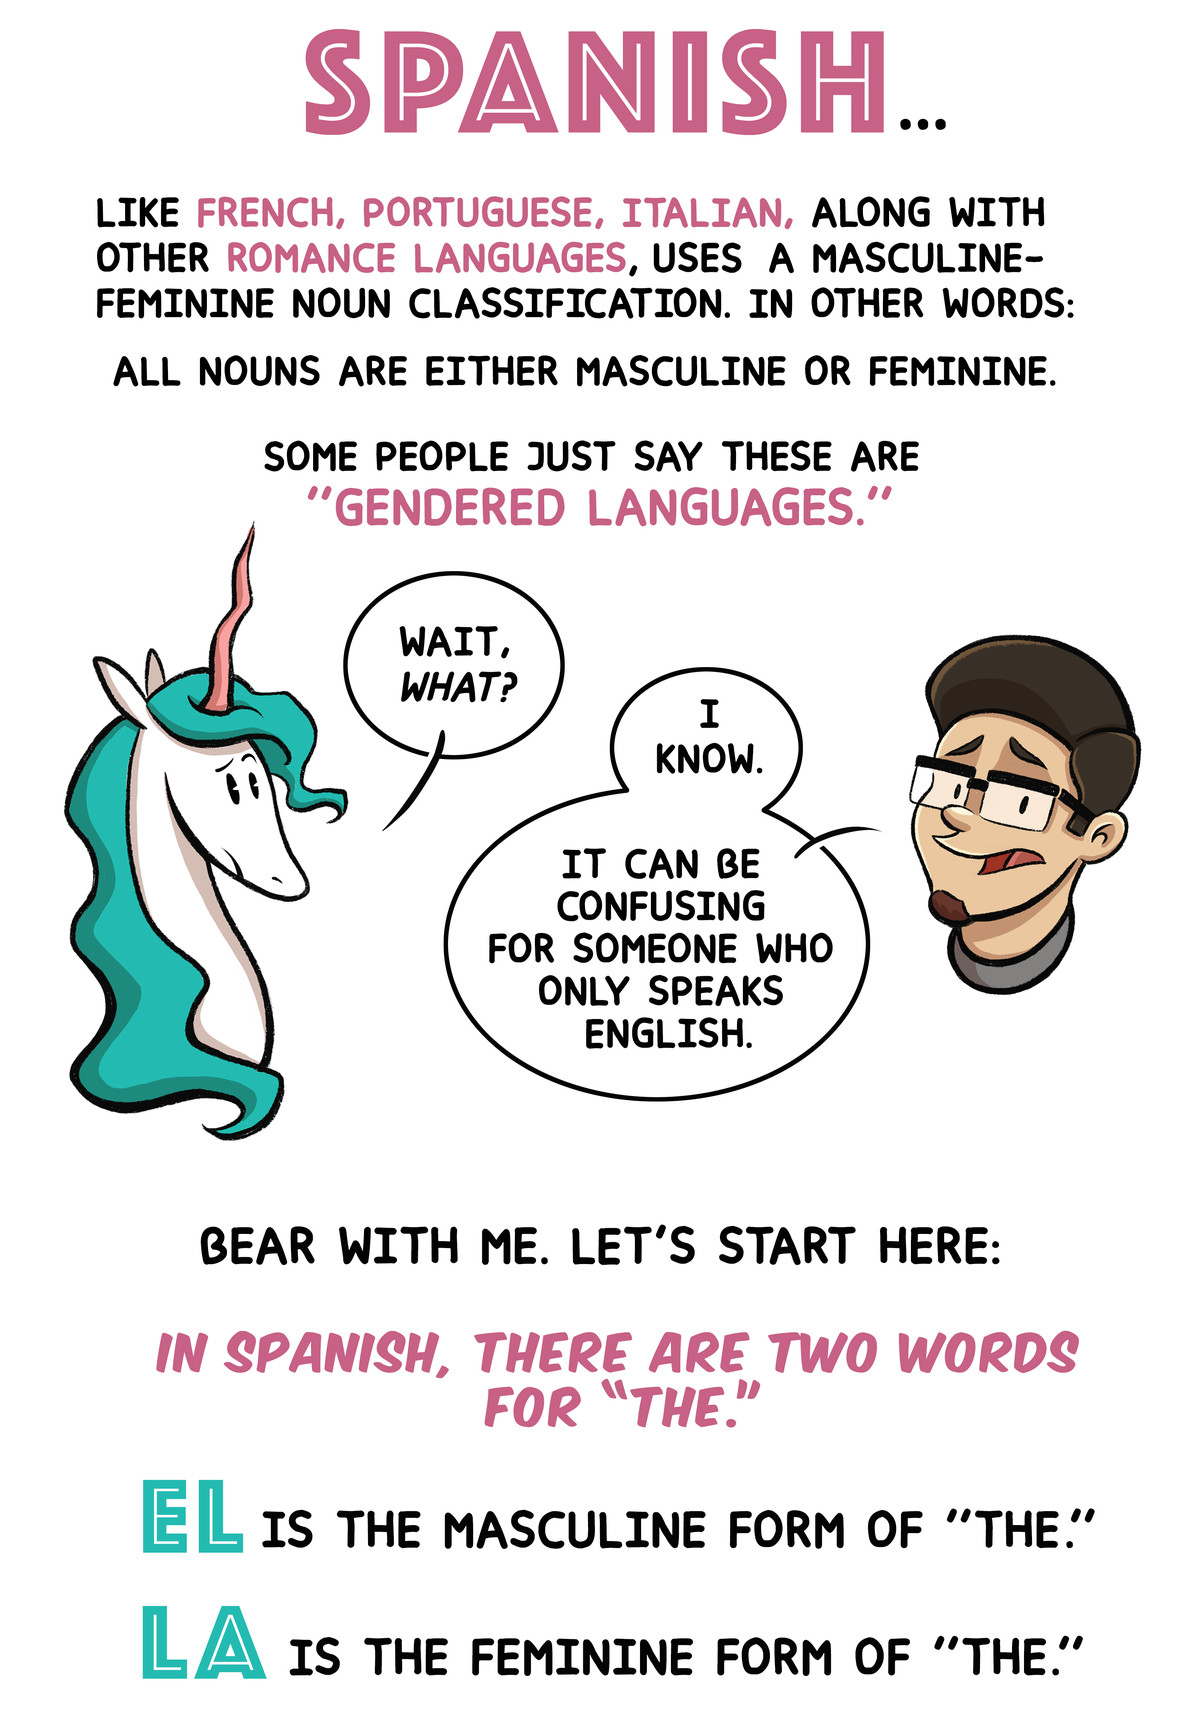 [In] Spanish ... all nouns are either masculine or feminine. Some people just say these are “gendered languages.” ... In Spanish, there are two words for “the.” El is the masculine form of “the.” La is the feminine form of “the.”